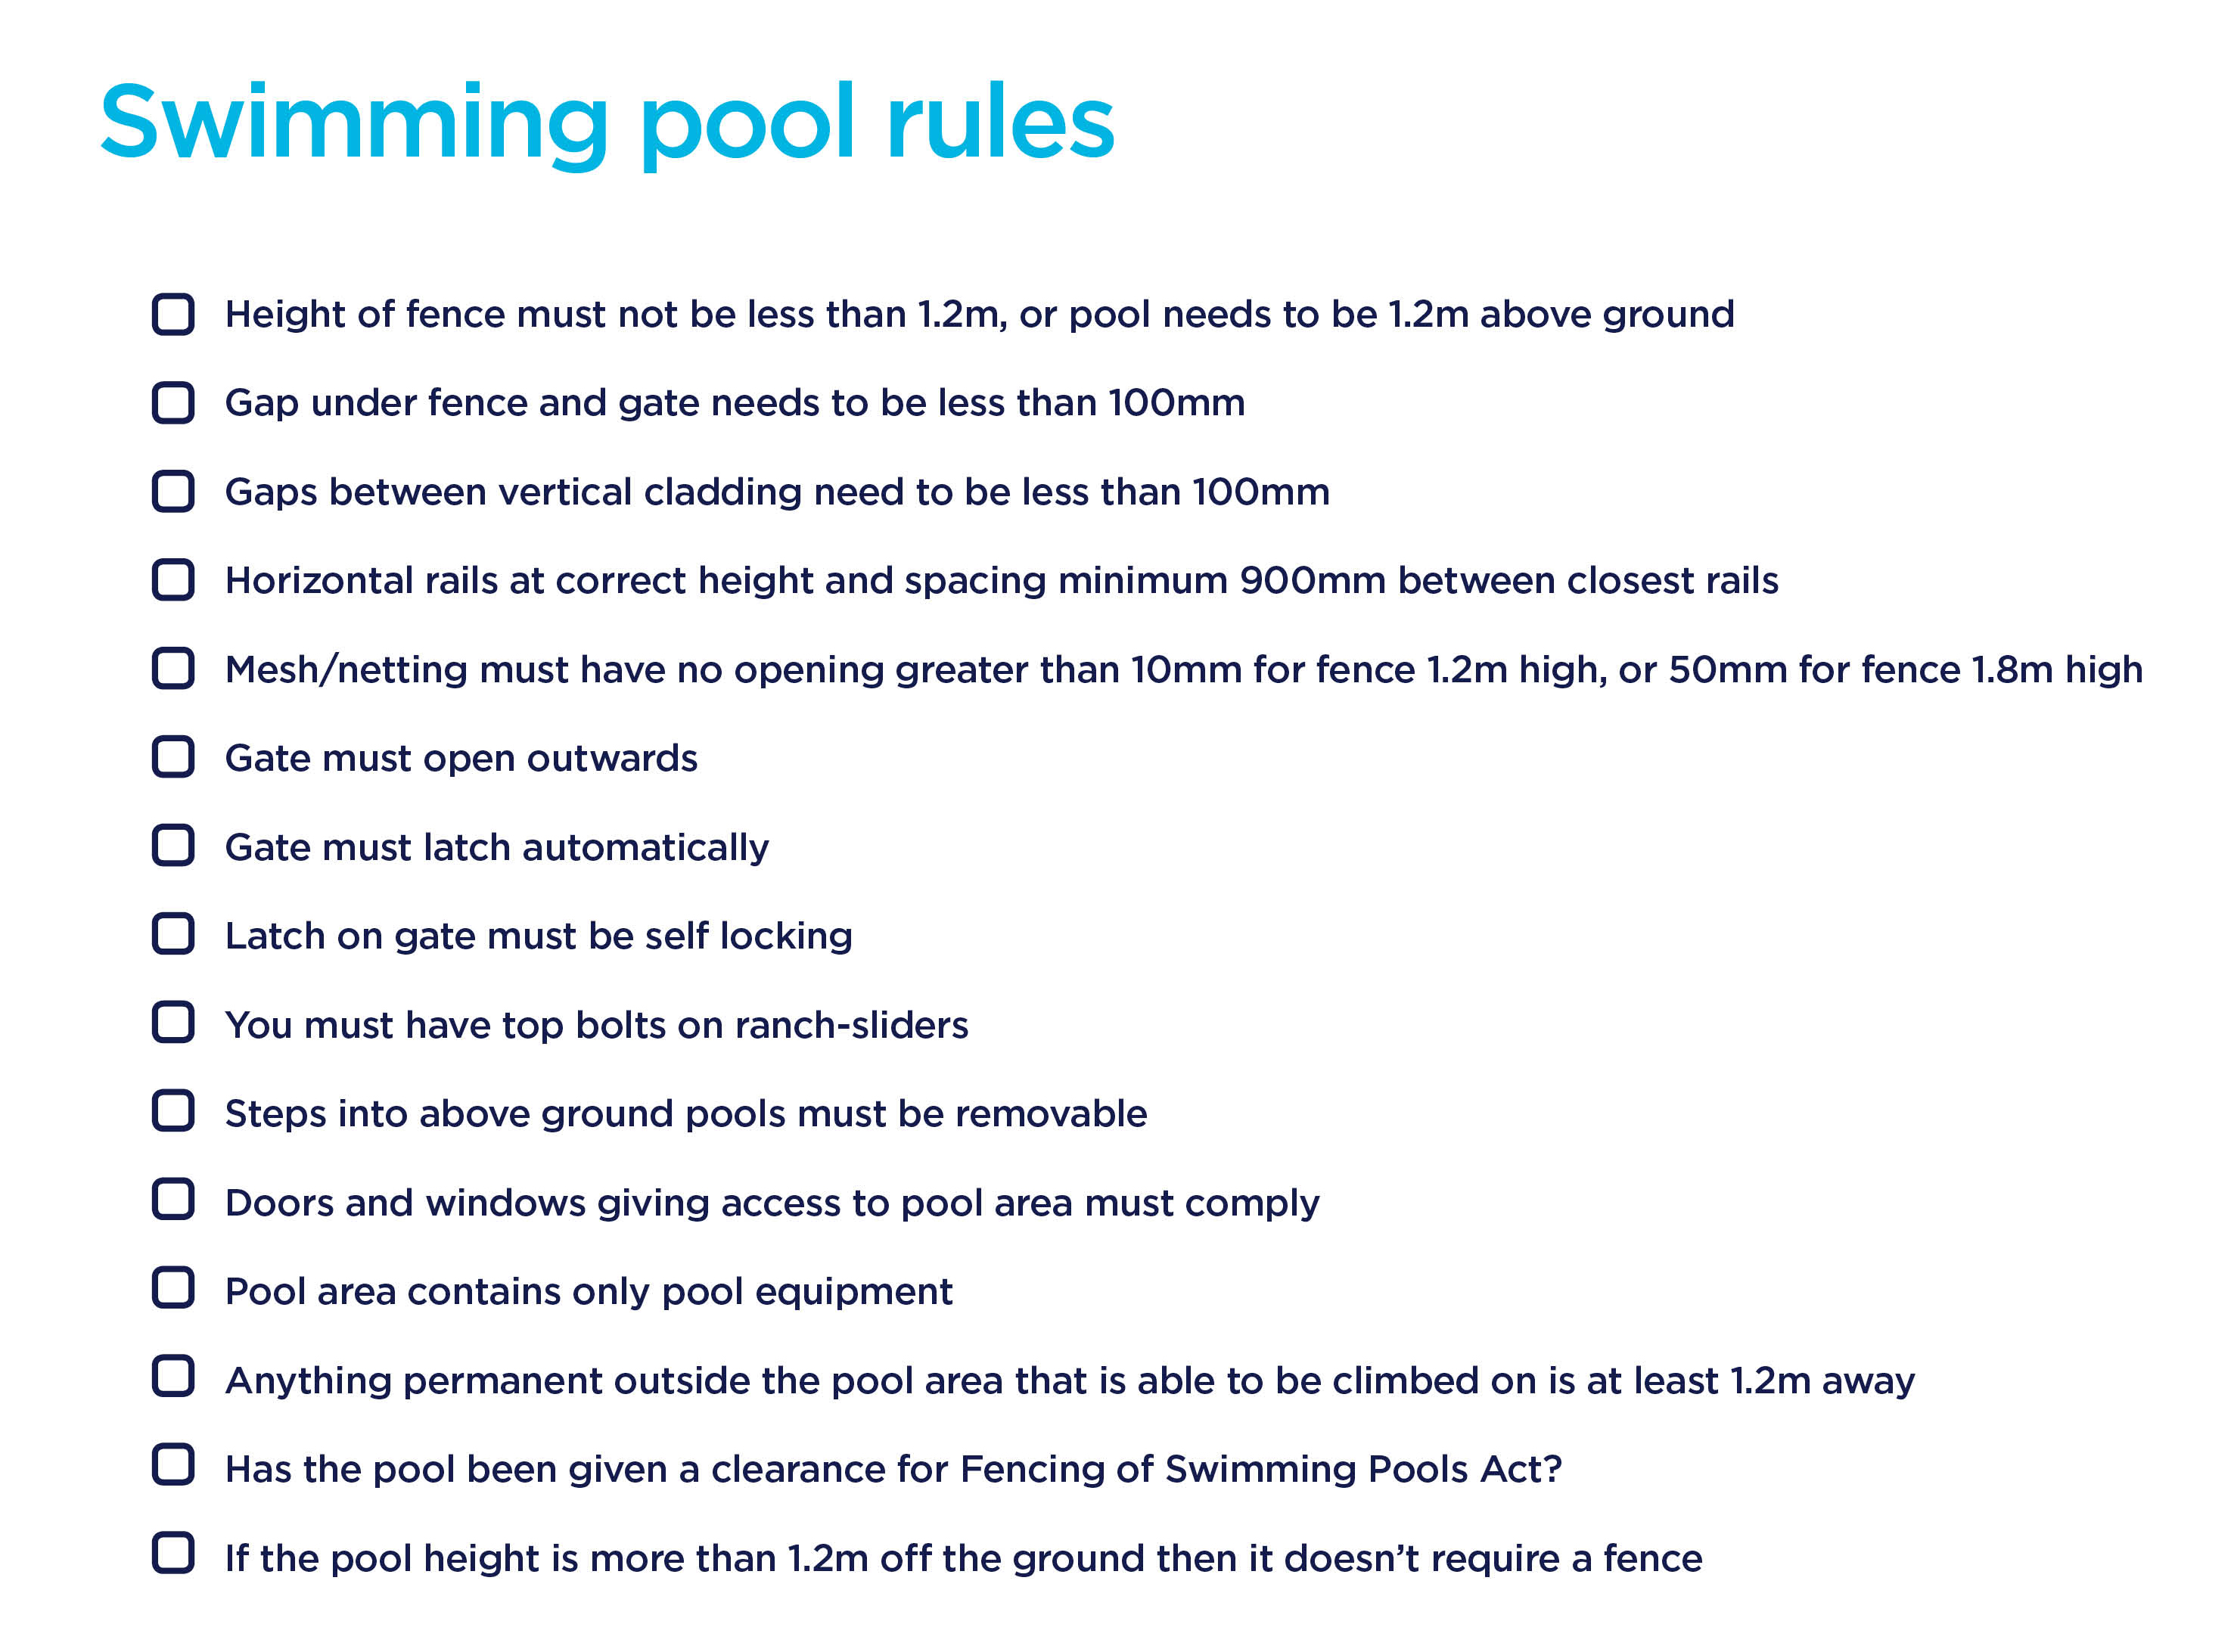 Swimming pool rules checklist